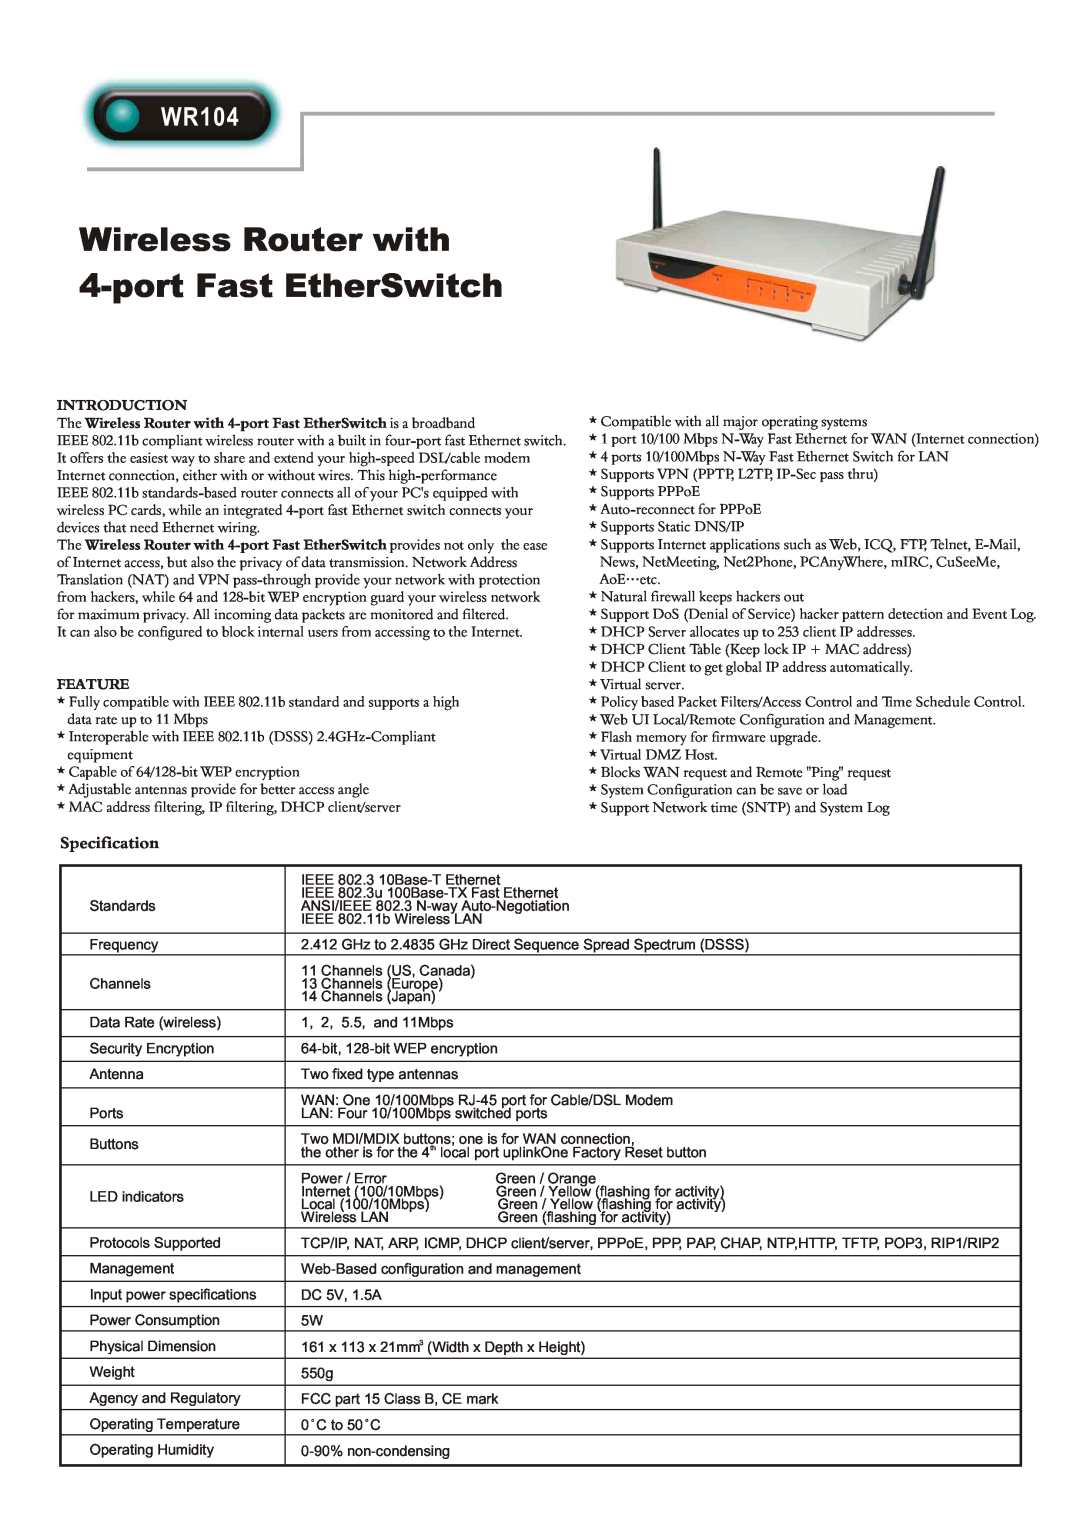 Abocom WR104 specifications Wireless Router with 4-port Fast EtherSwitch, Specification, Introduction, Feature 